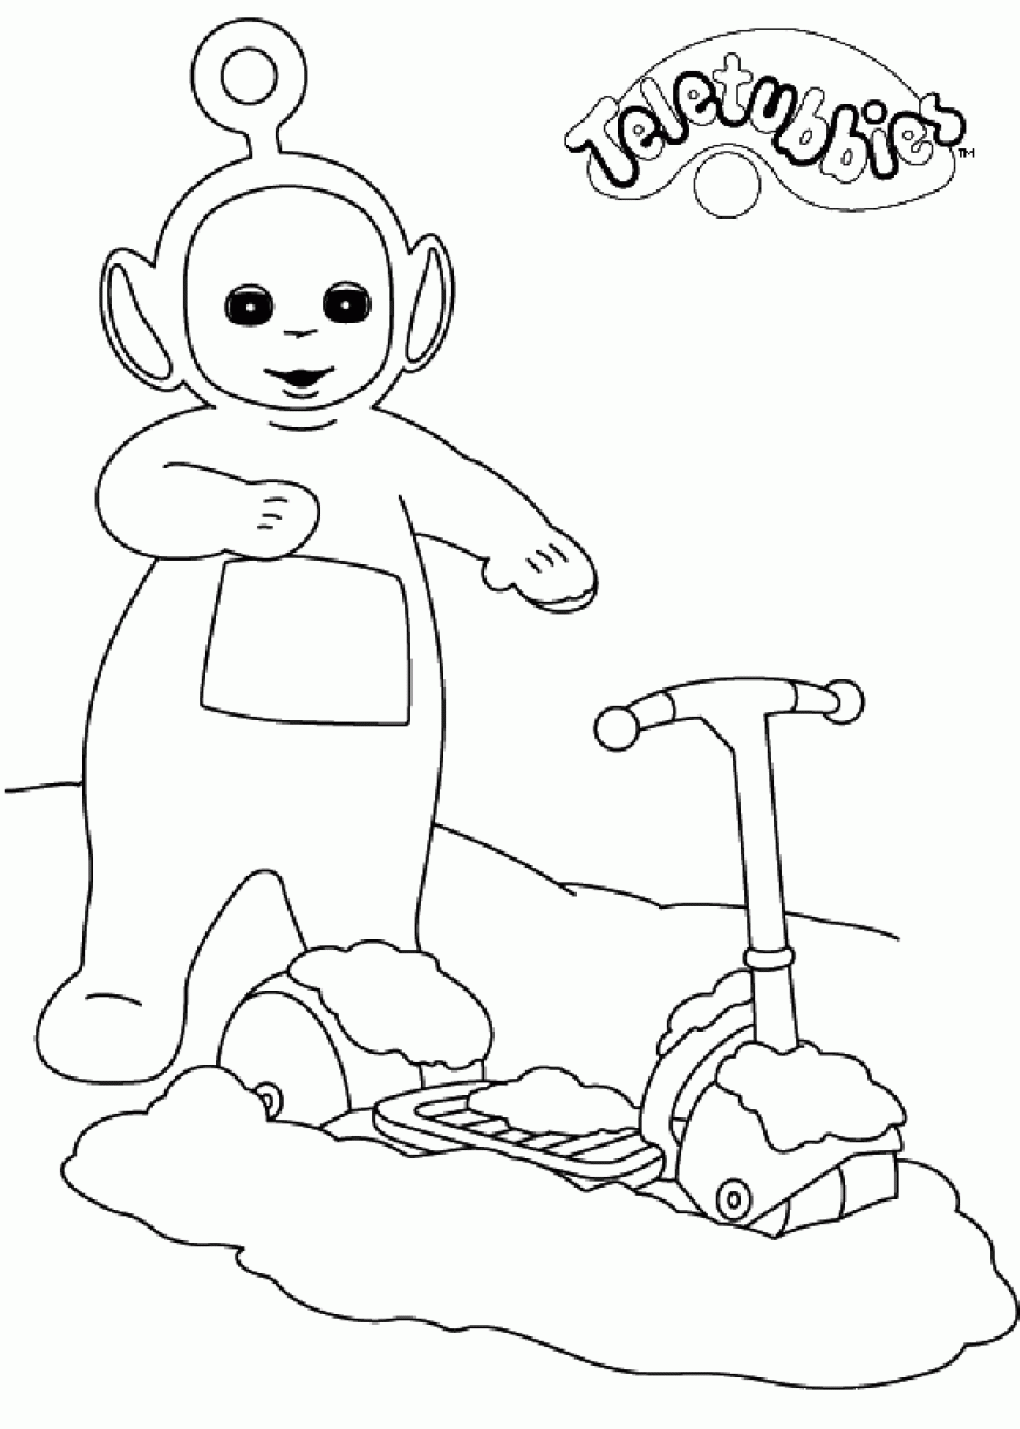 Image of a Teletubbies to color